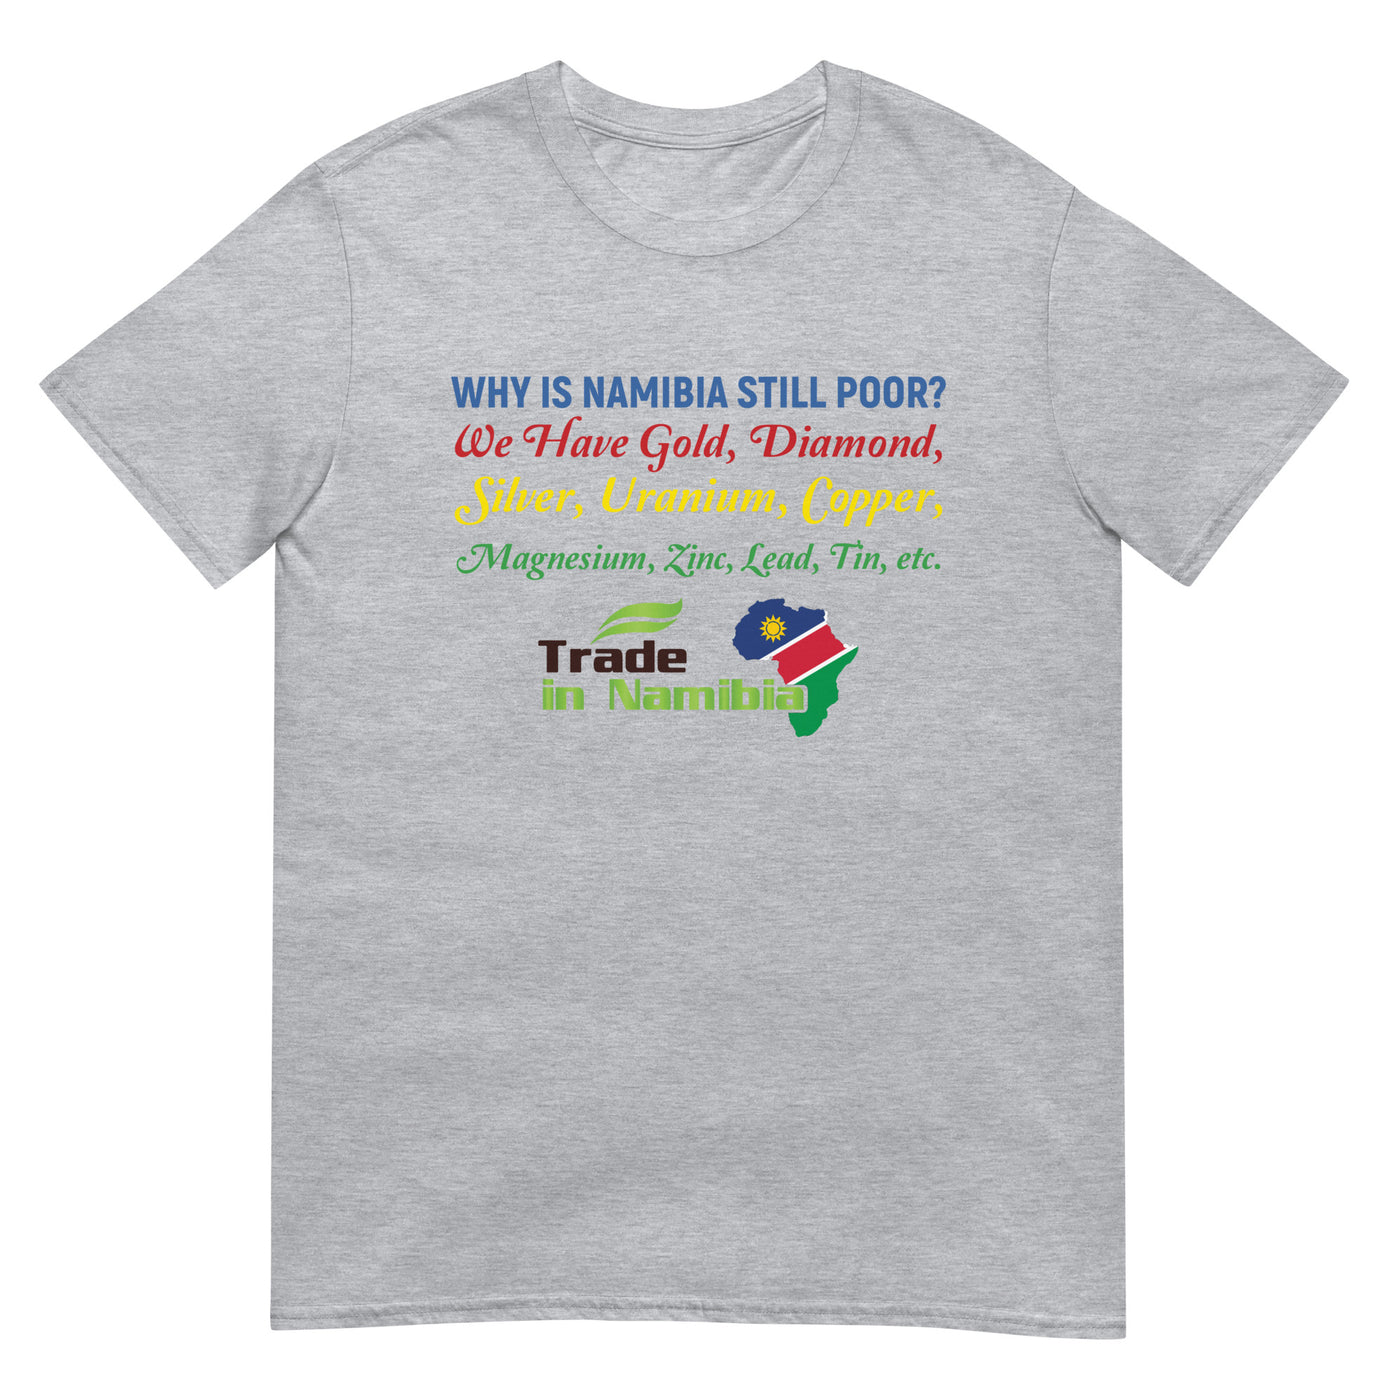 We Have It All - Trade In Namibia Short-Sleeve Unisex T-Shirt